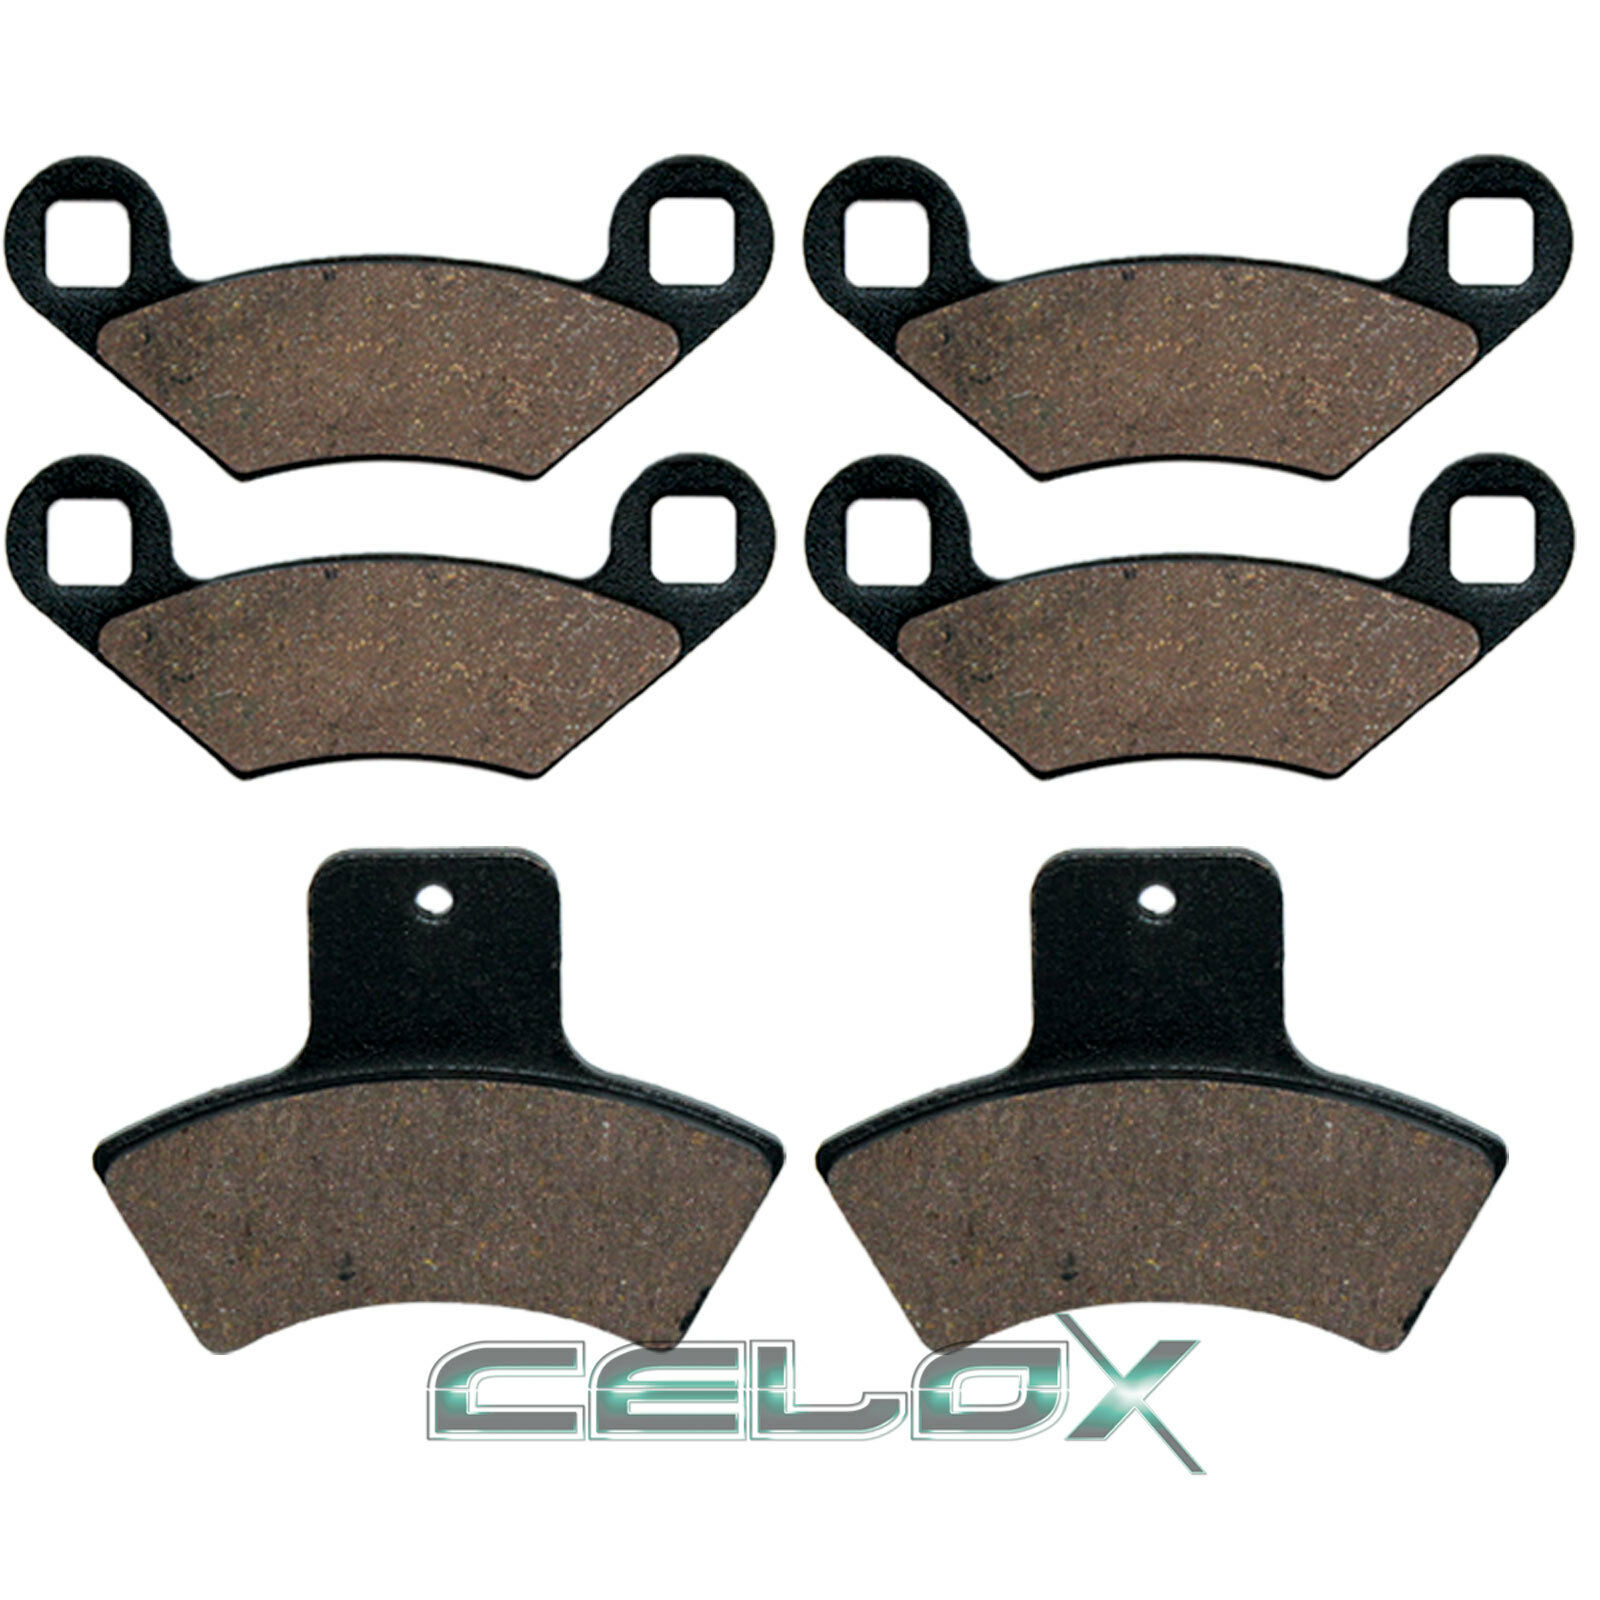 2001-2002 Front and Rear Brake Pads For POLARIS Sportsman 400